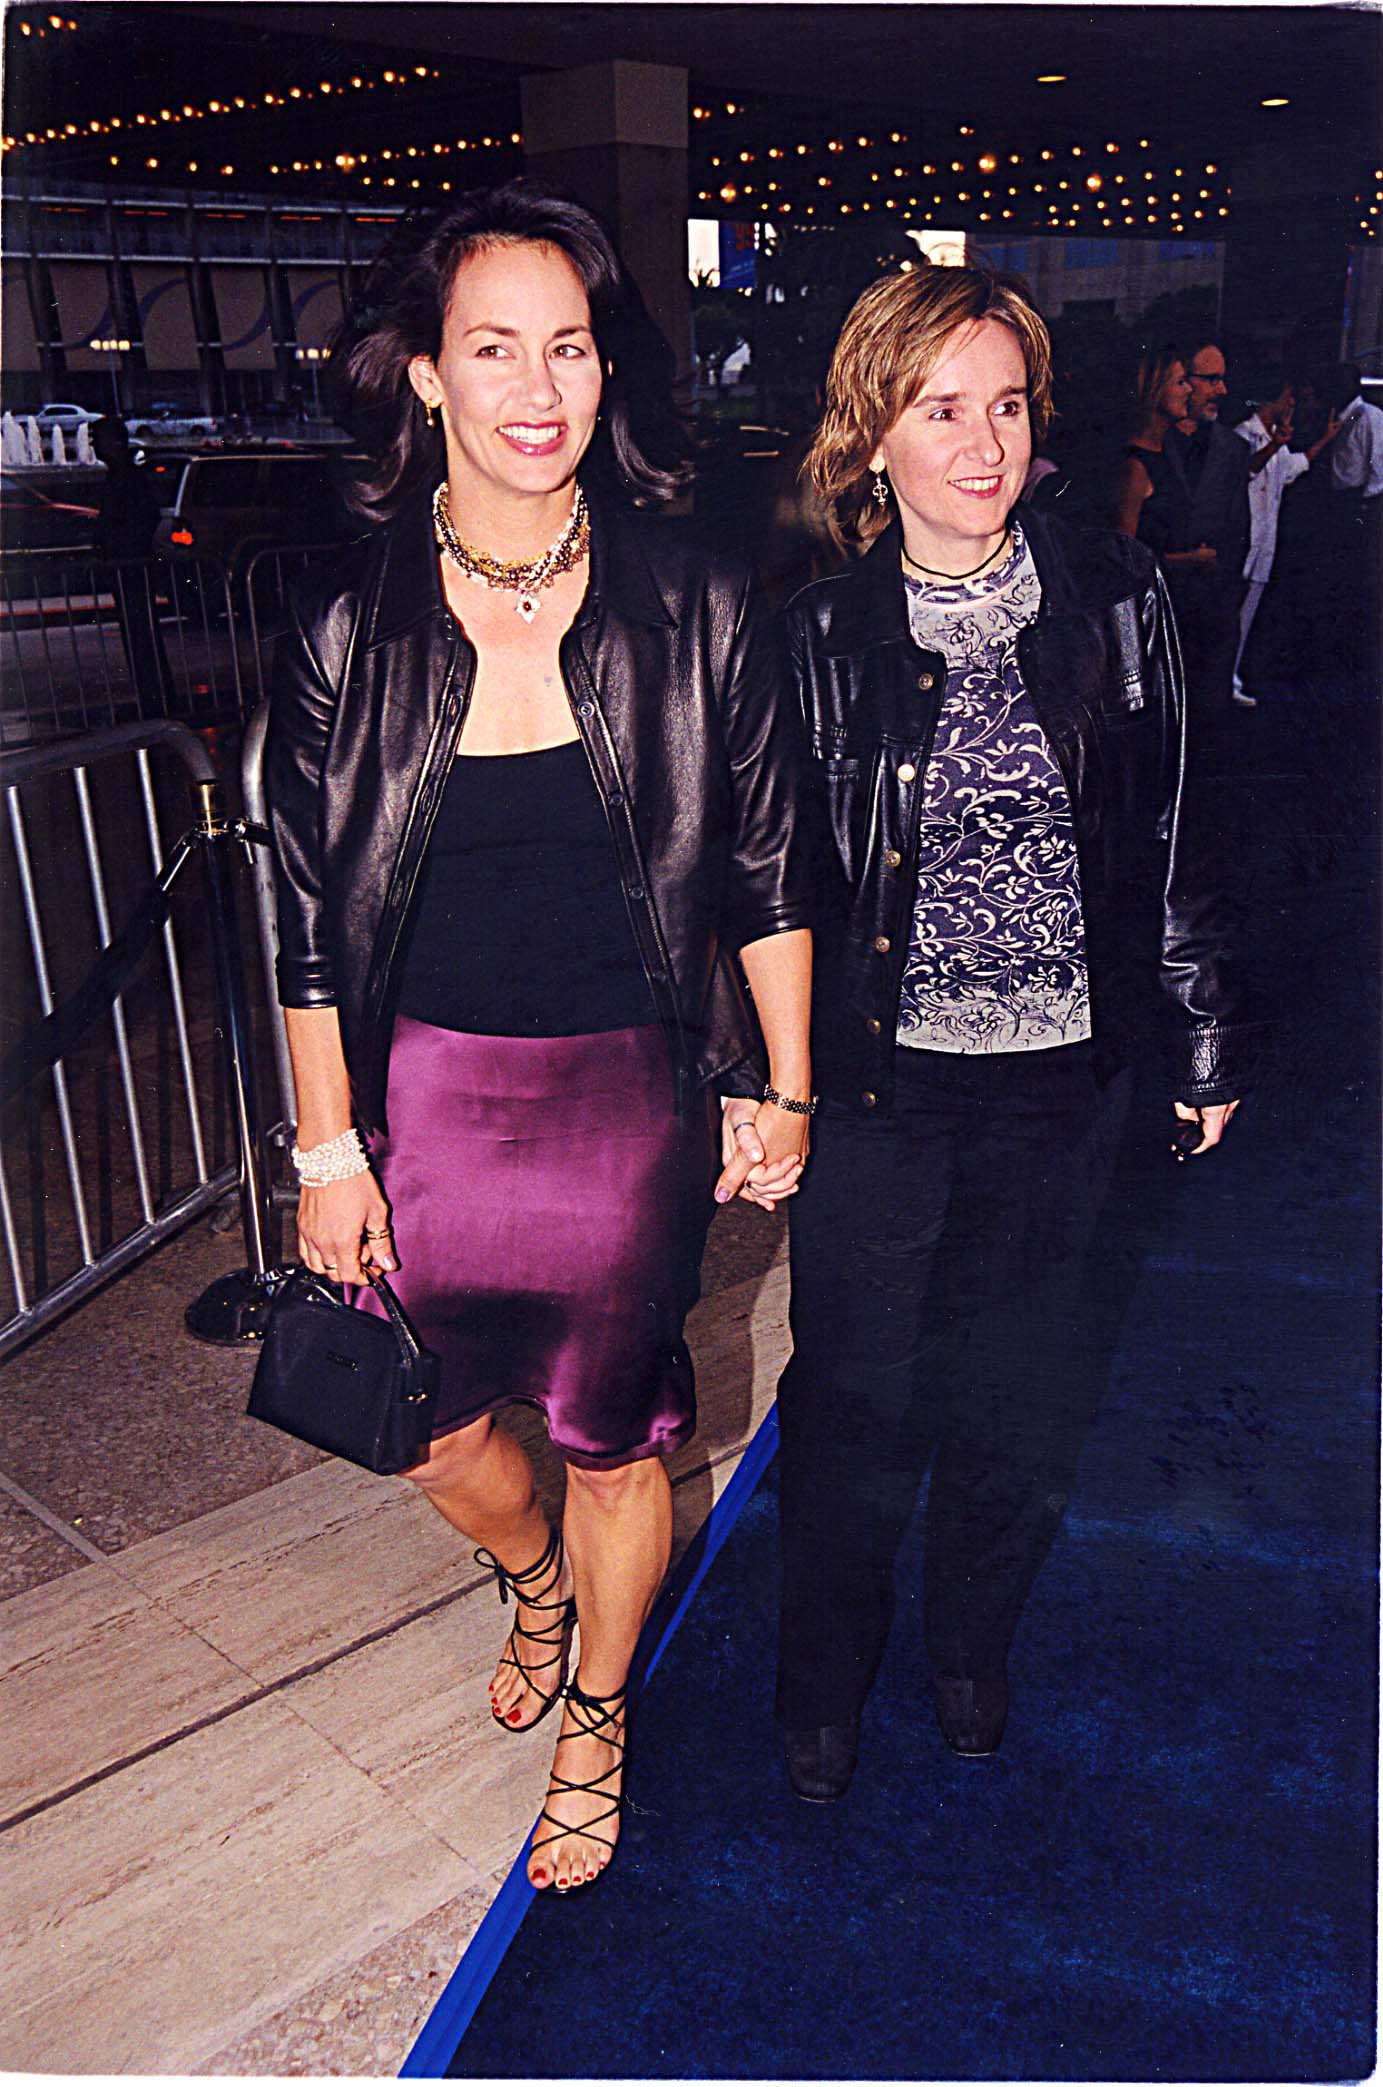 Melissa Etheridge and Julie Cypher at the premiere of “Love Letter" on May 21, 1999, in California. | Source: Getty Images